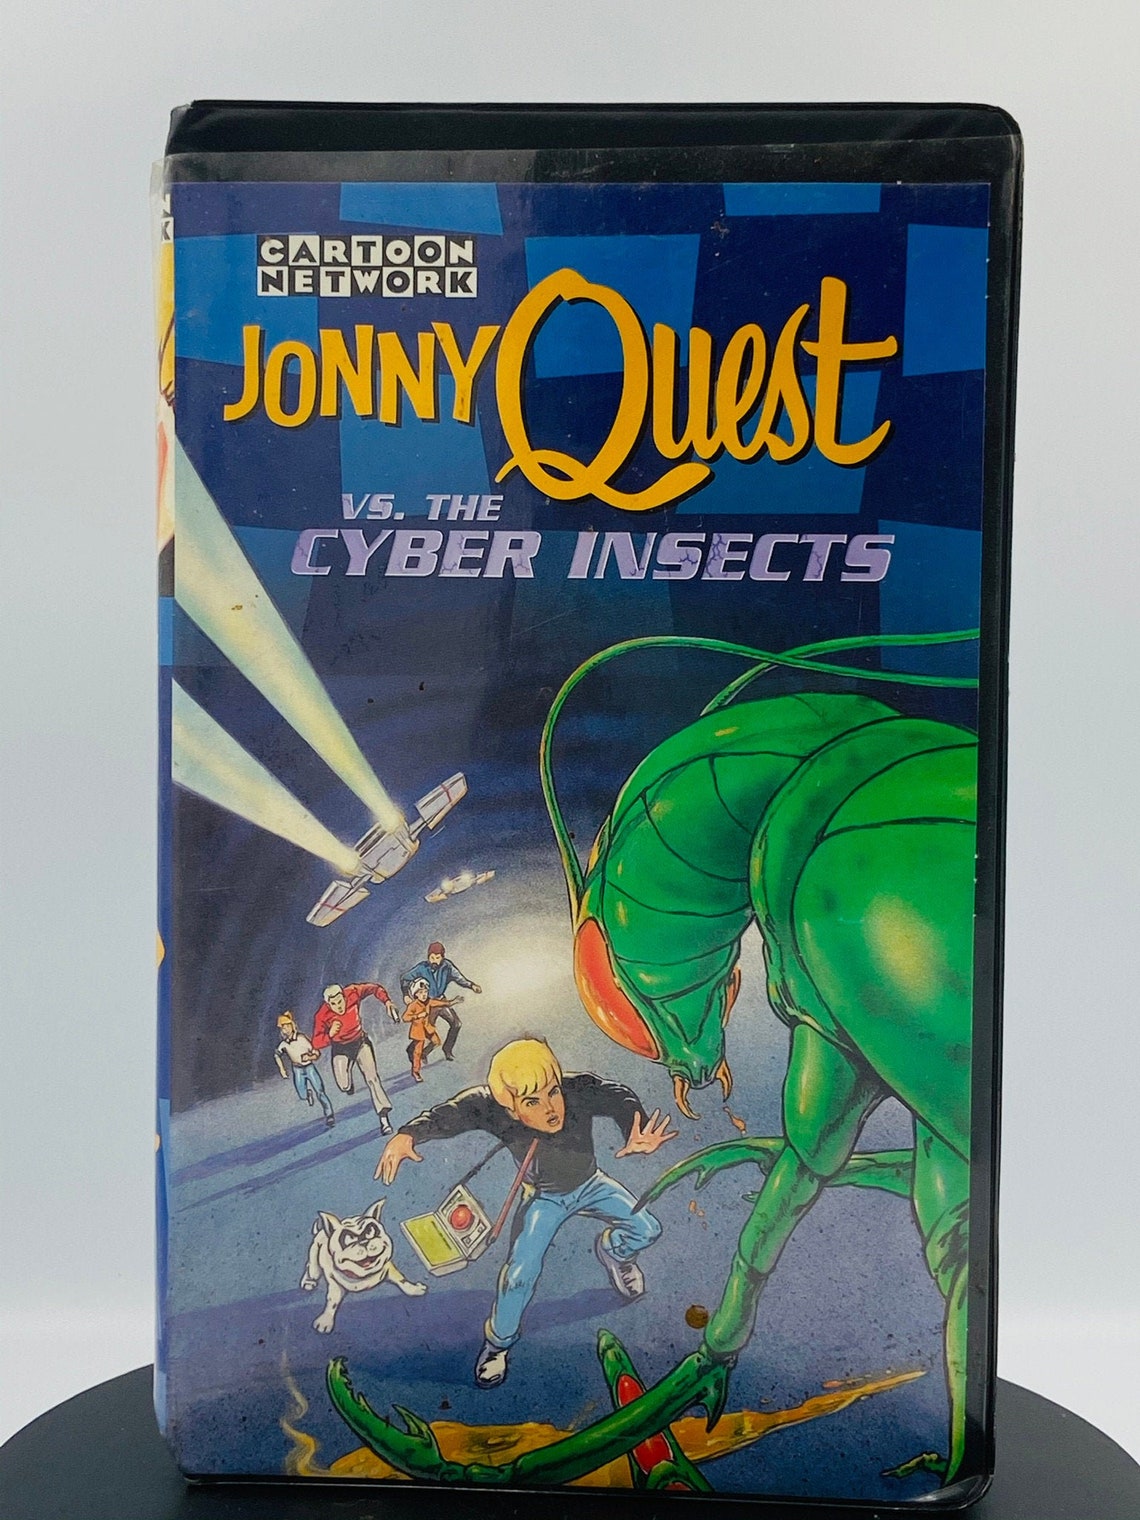 Jonny Quest vs. the Cyber Insects (Western Animation) - TV Tropes